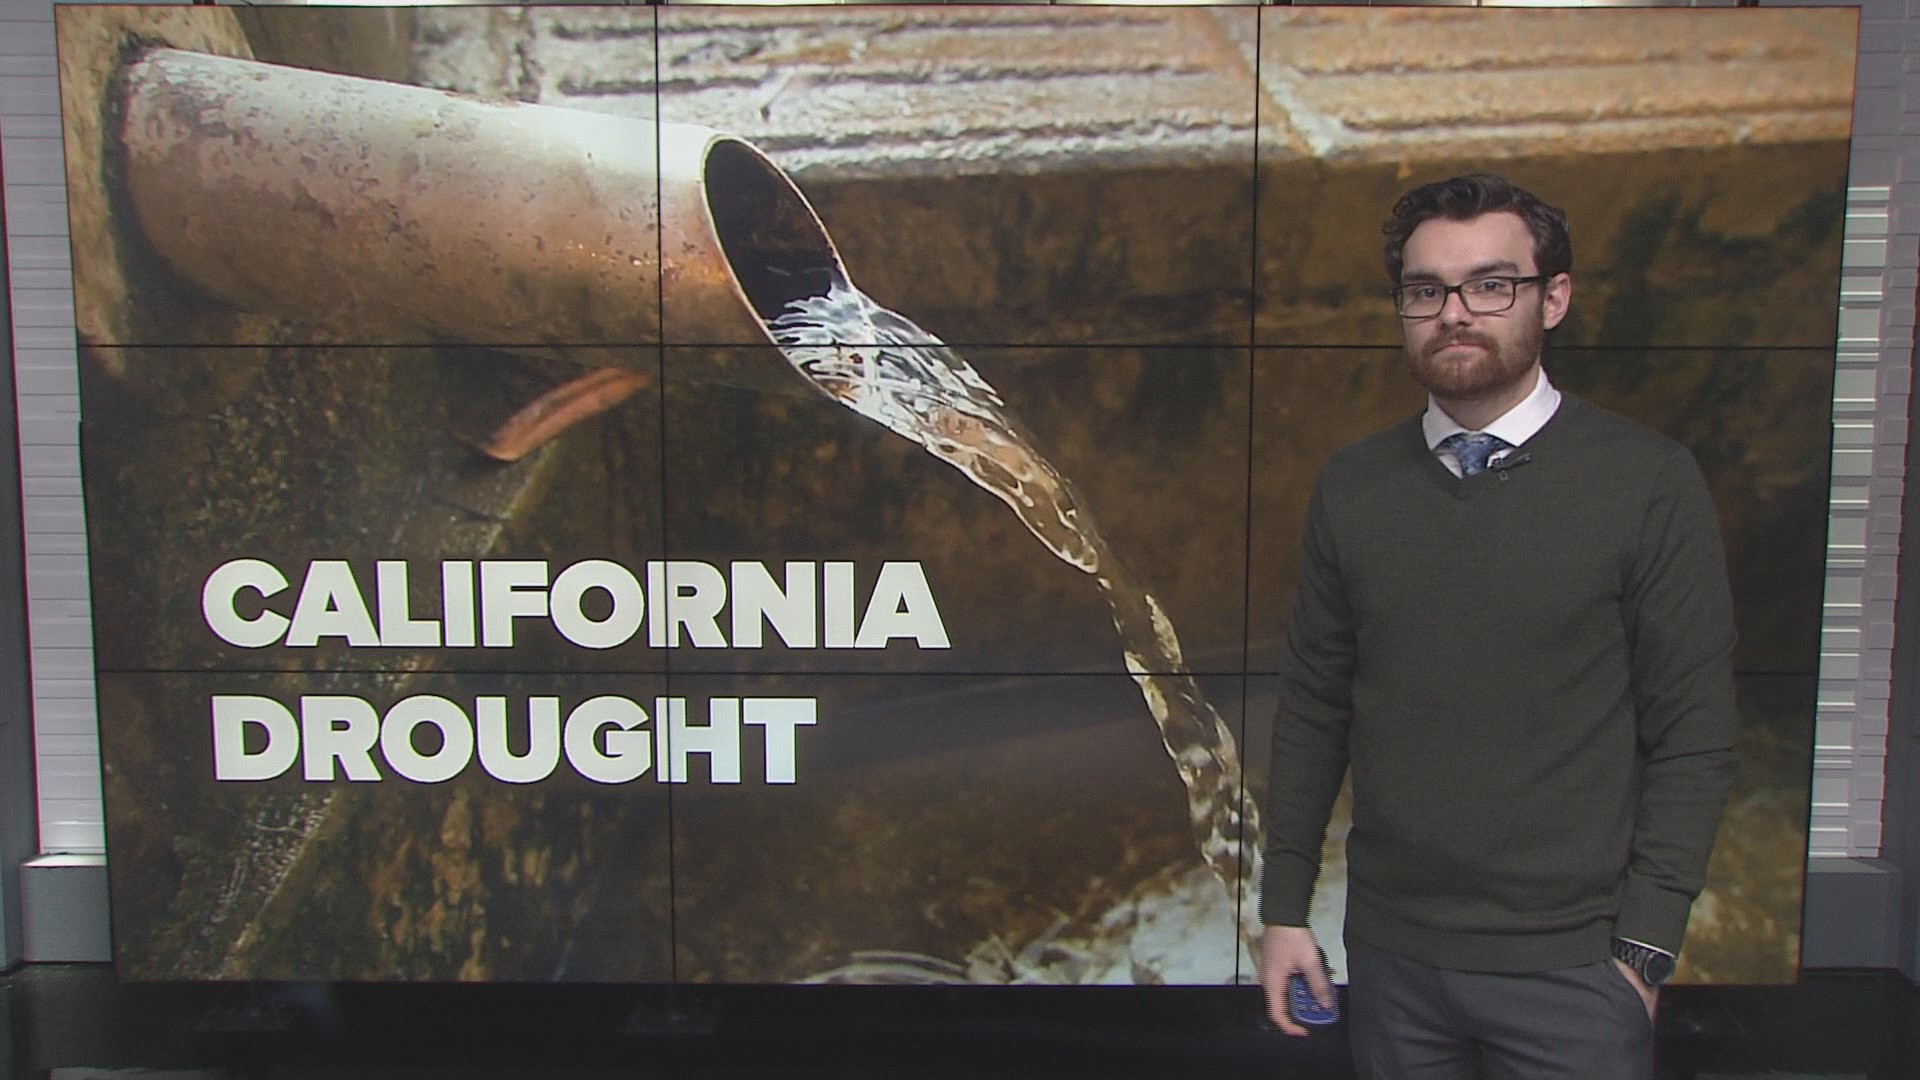 ABC10 meteorologist Brenden Mincheff says the most recent winter storm has cut exceptional drought in half, while grants from the EPA will improve water quality.